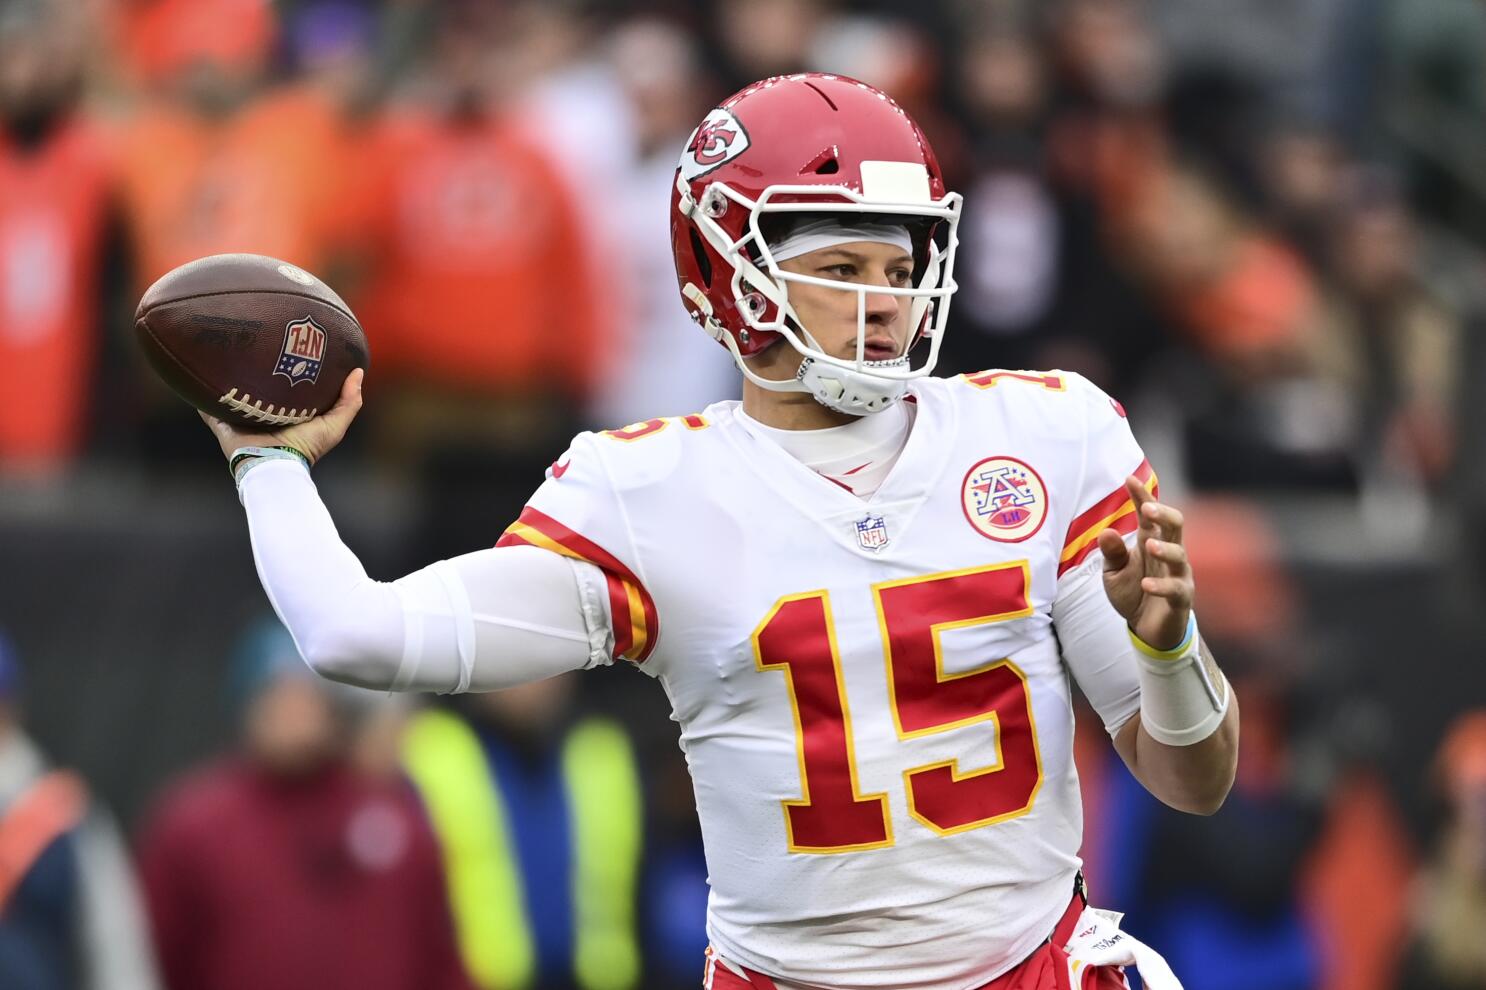 Chiefs look to continue streak, Broncos take it personally